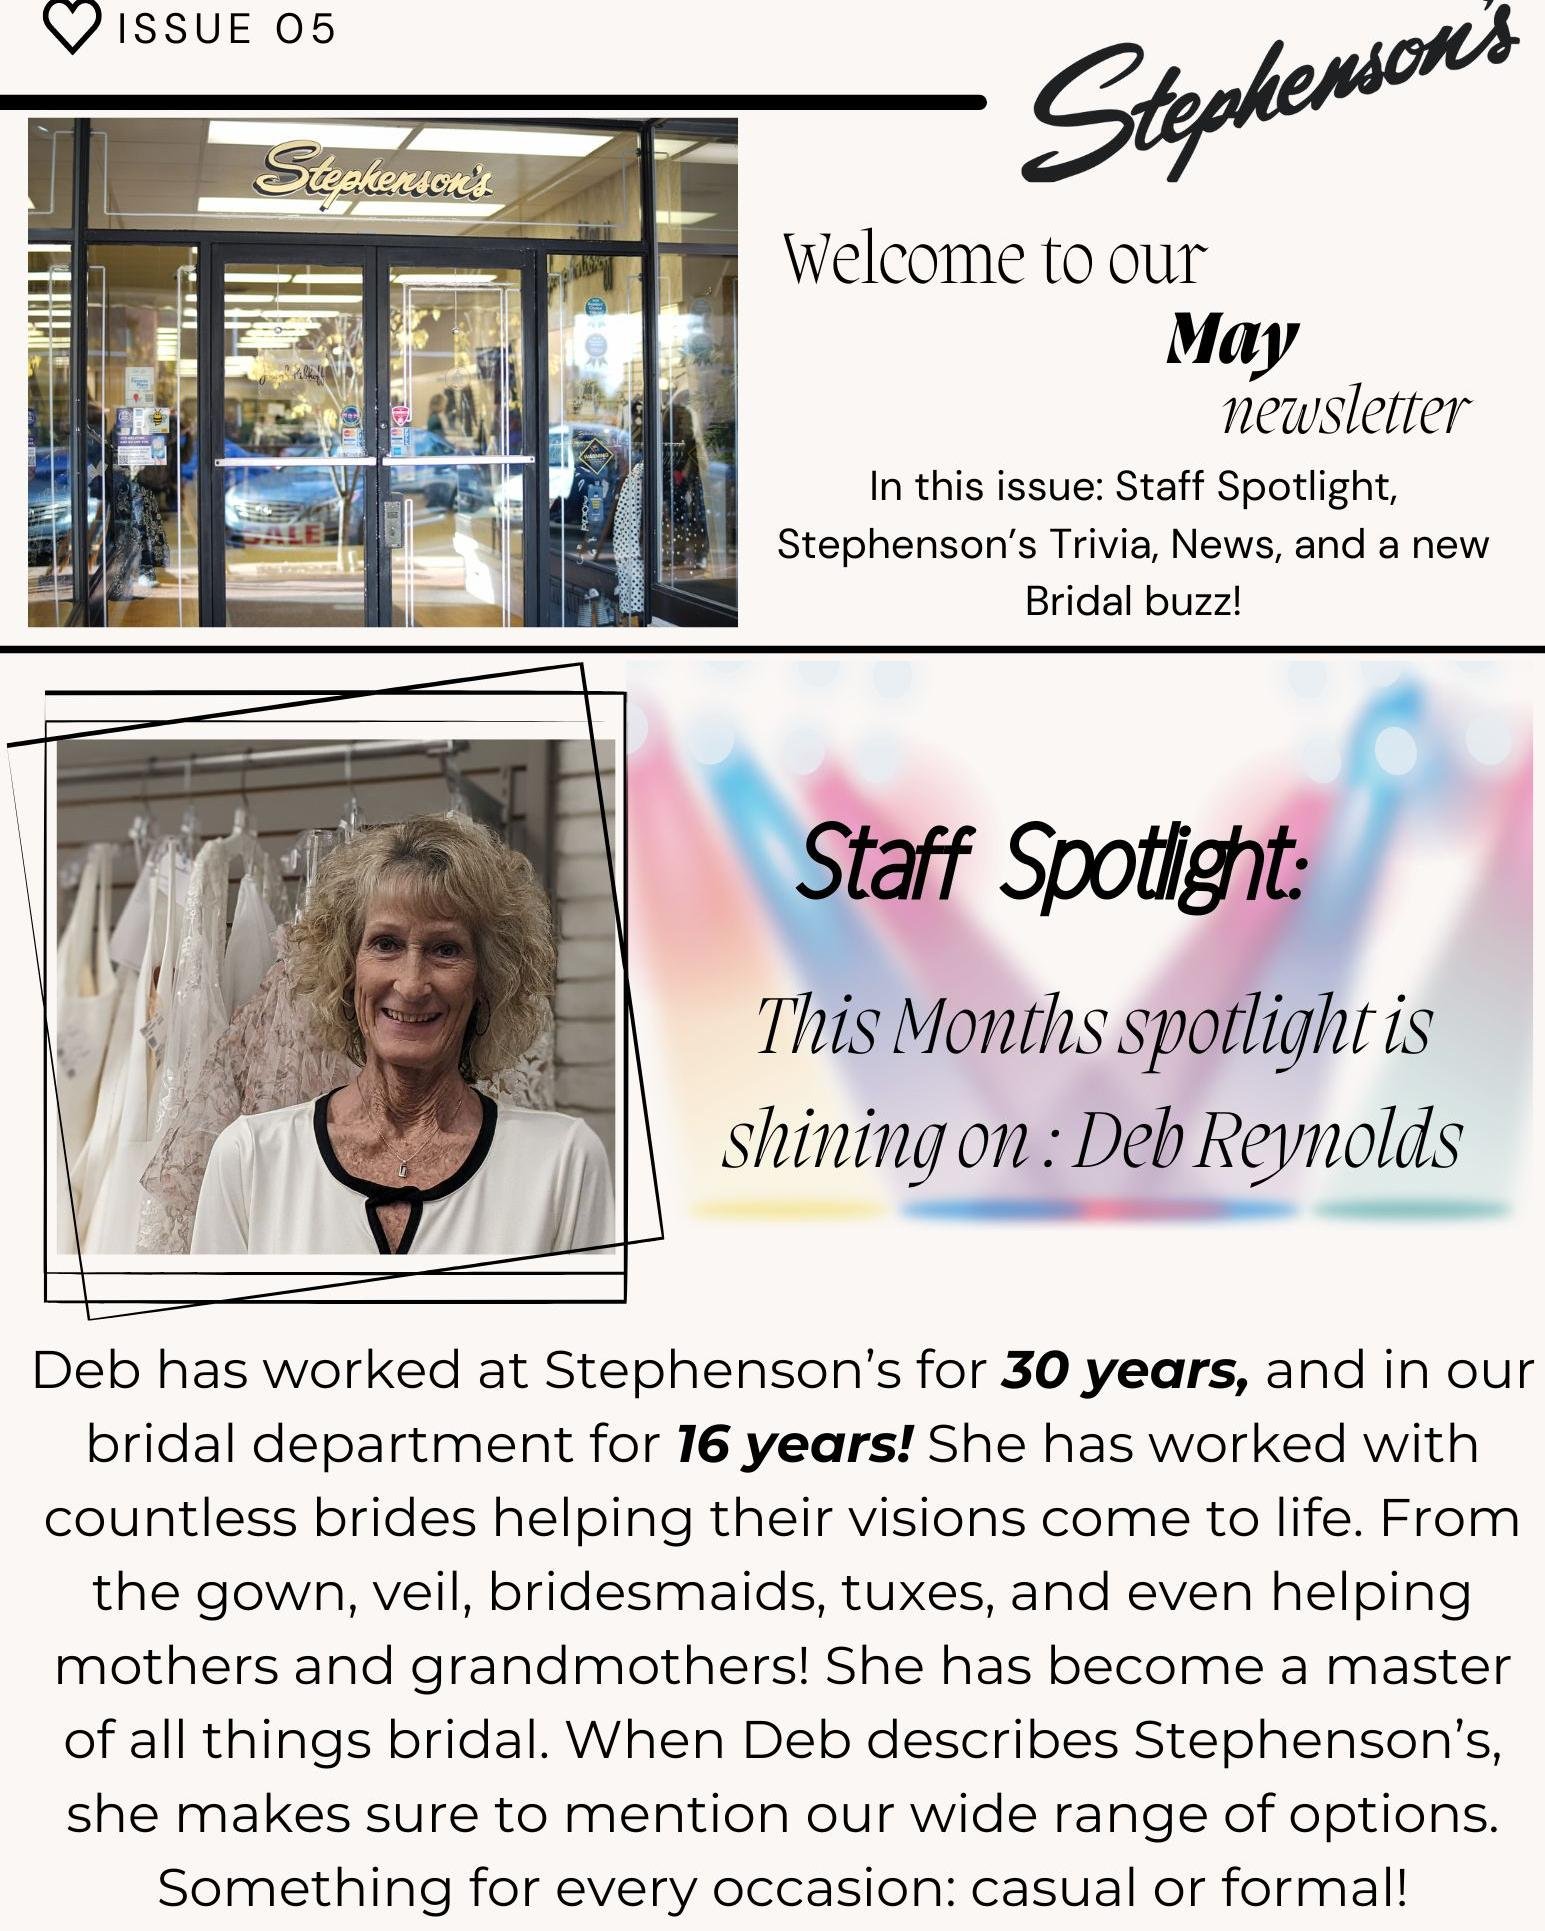 Welcome back to Stephenson&rsquo;s Staff Spotlights! 
This month we are celebrating Deb!! Check out Deb&rsquo;s bio for a little bit about her.
Have any favorite Deb memories?? Let us know ❤️
We will be sending these spotlights out in our newsletter 